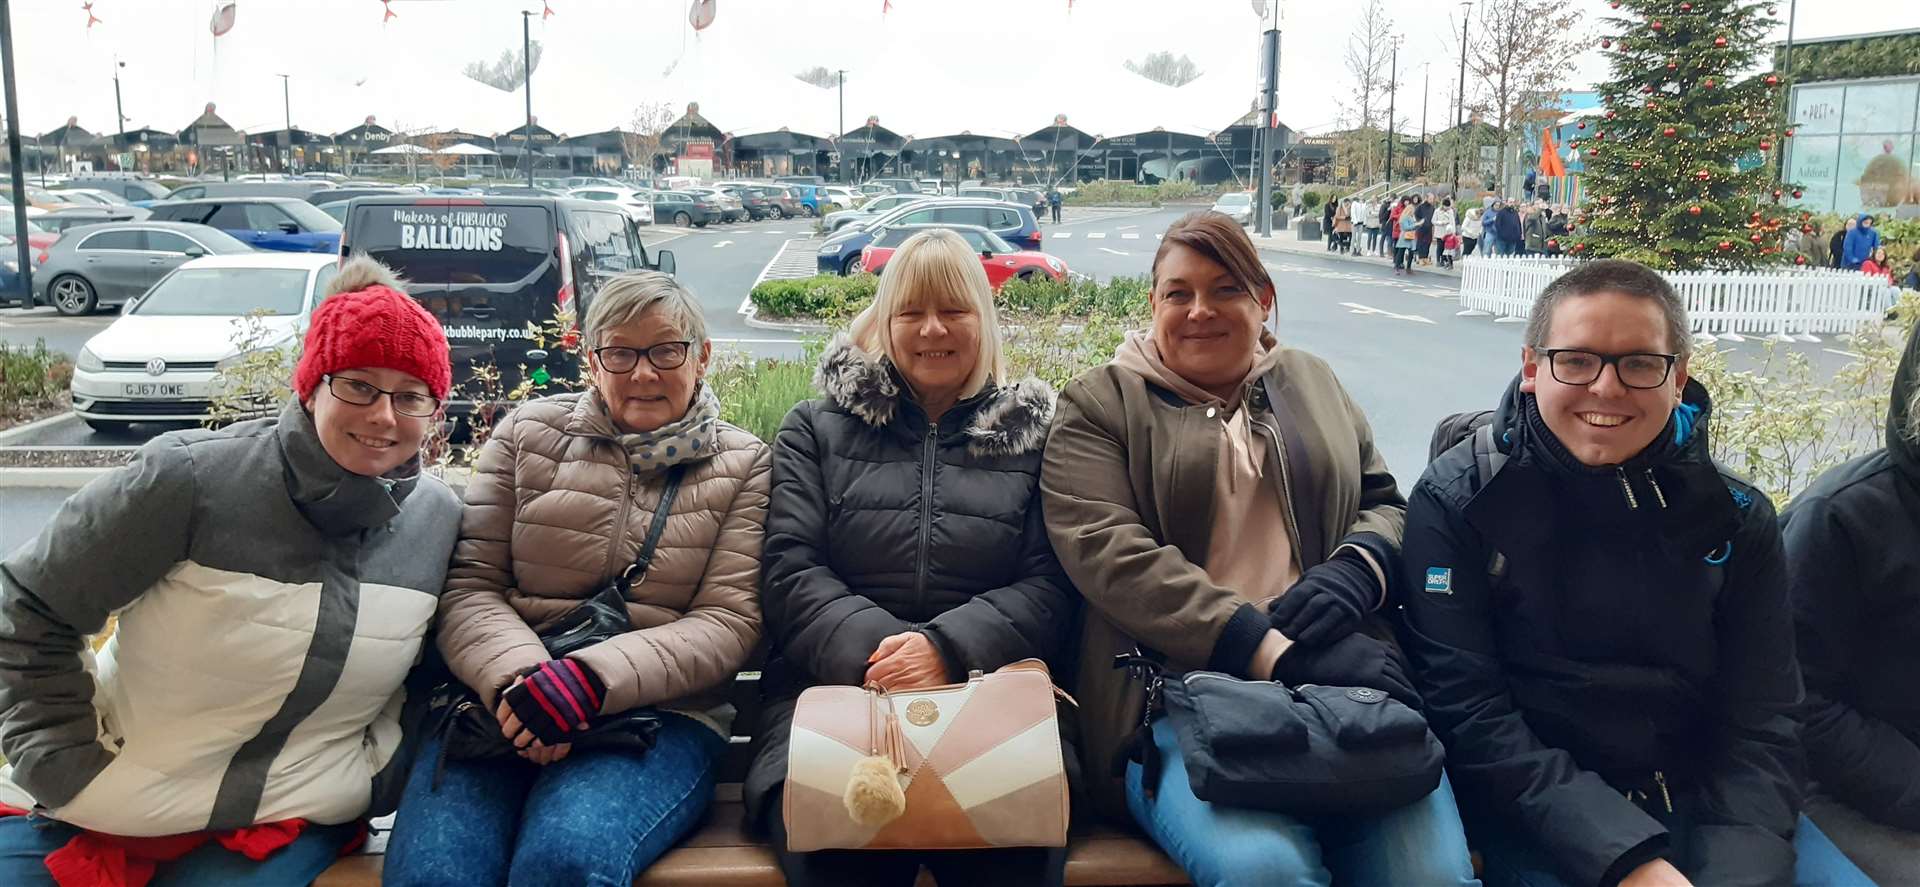 Christine White (centre), 68, was the first person in the queue, arriving at 9am